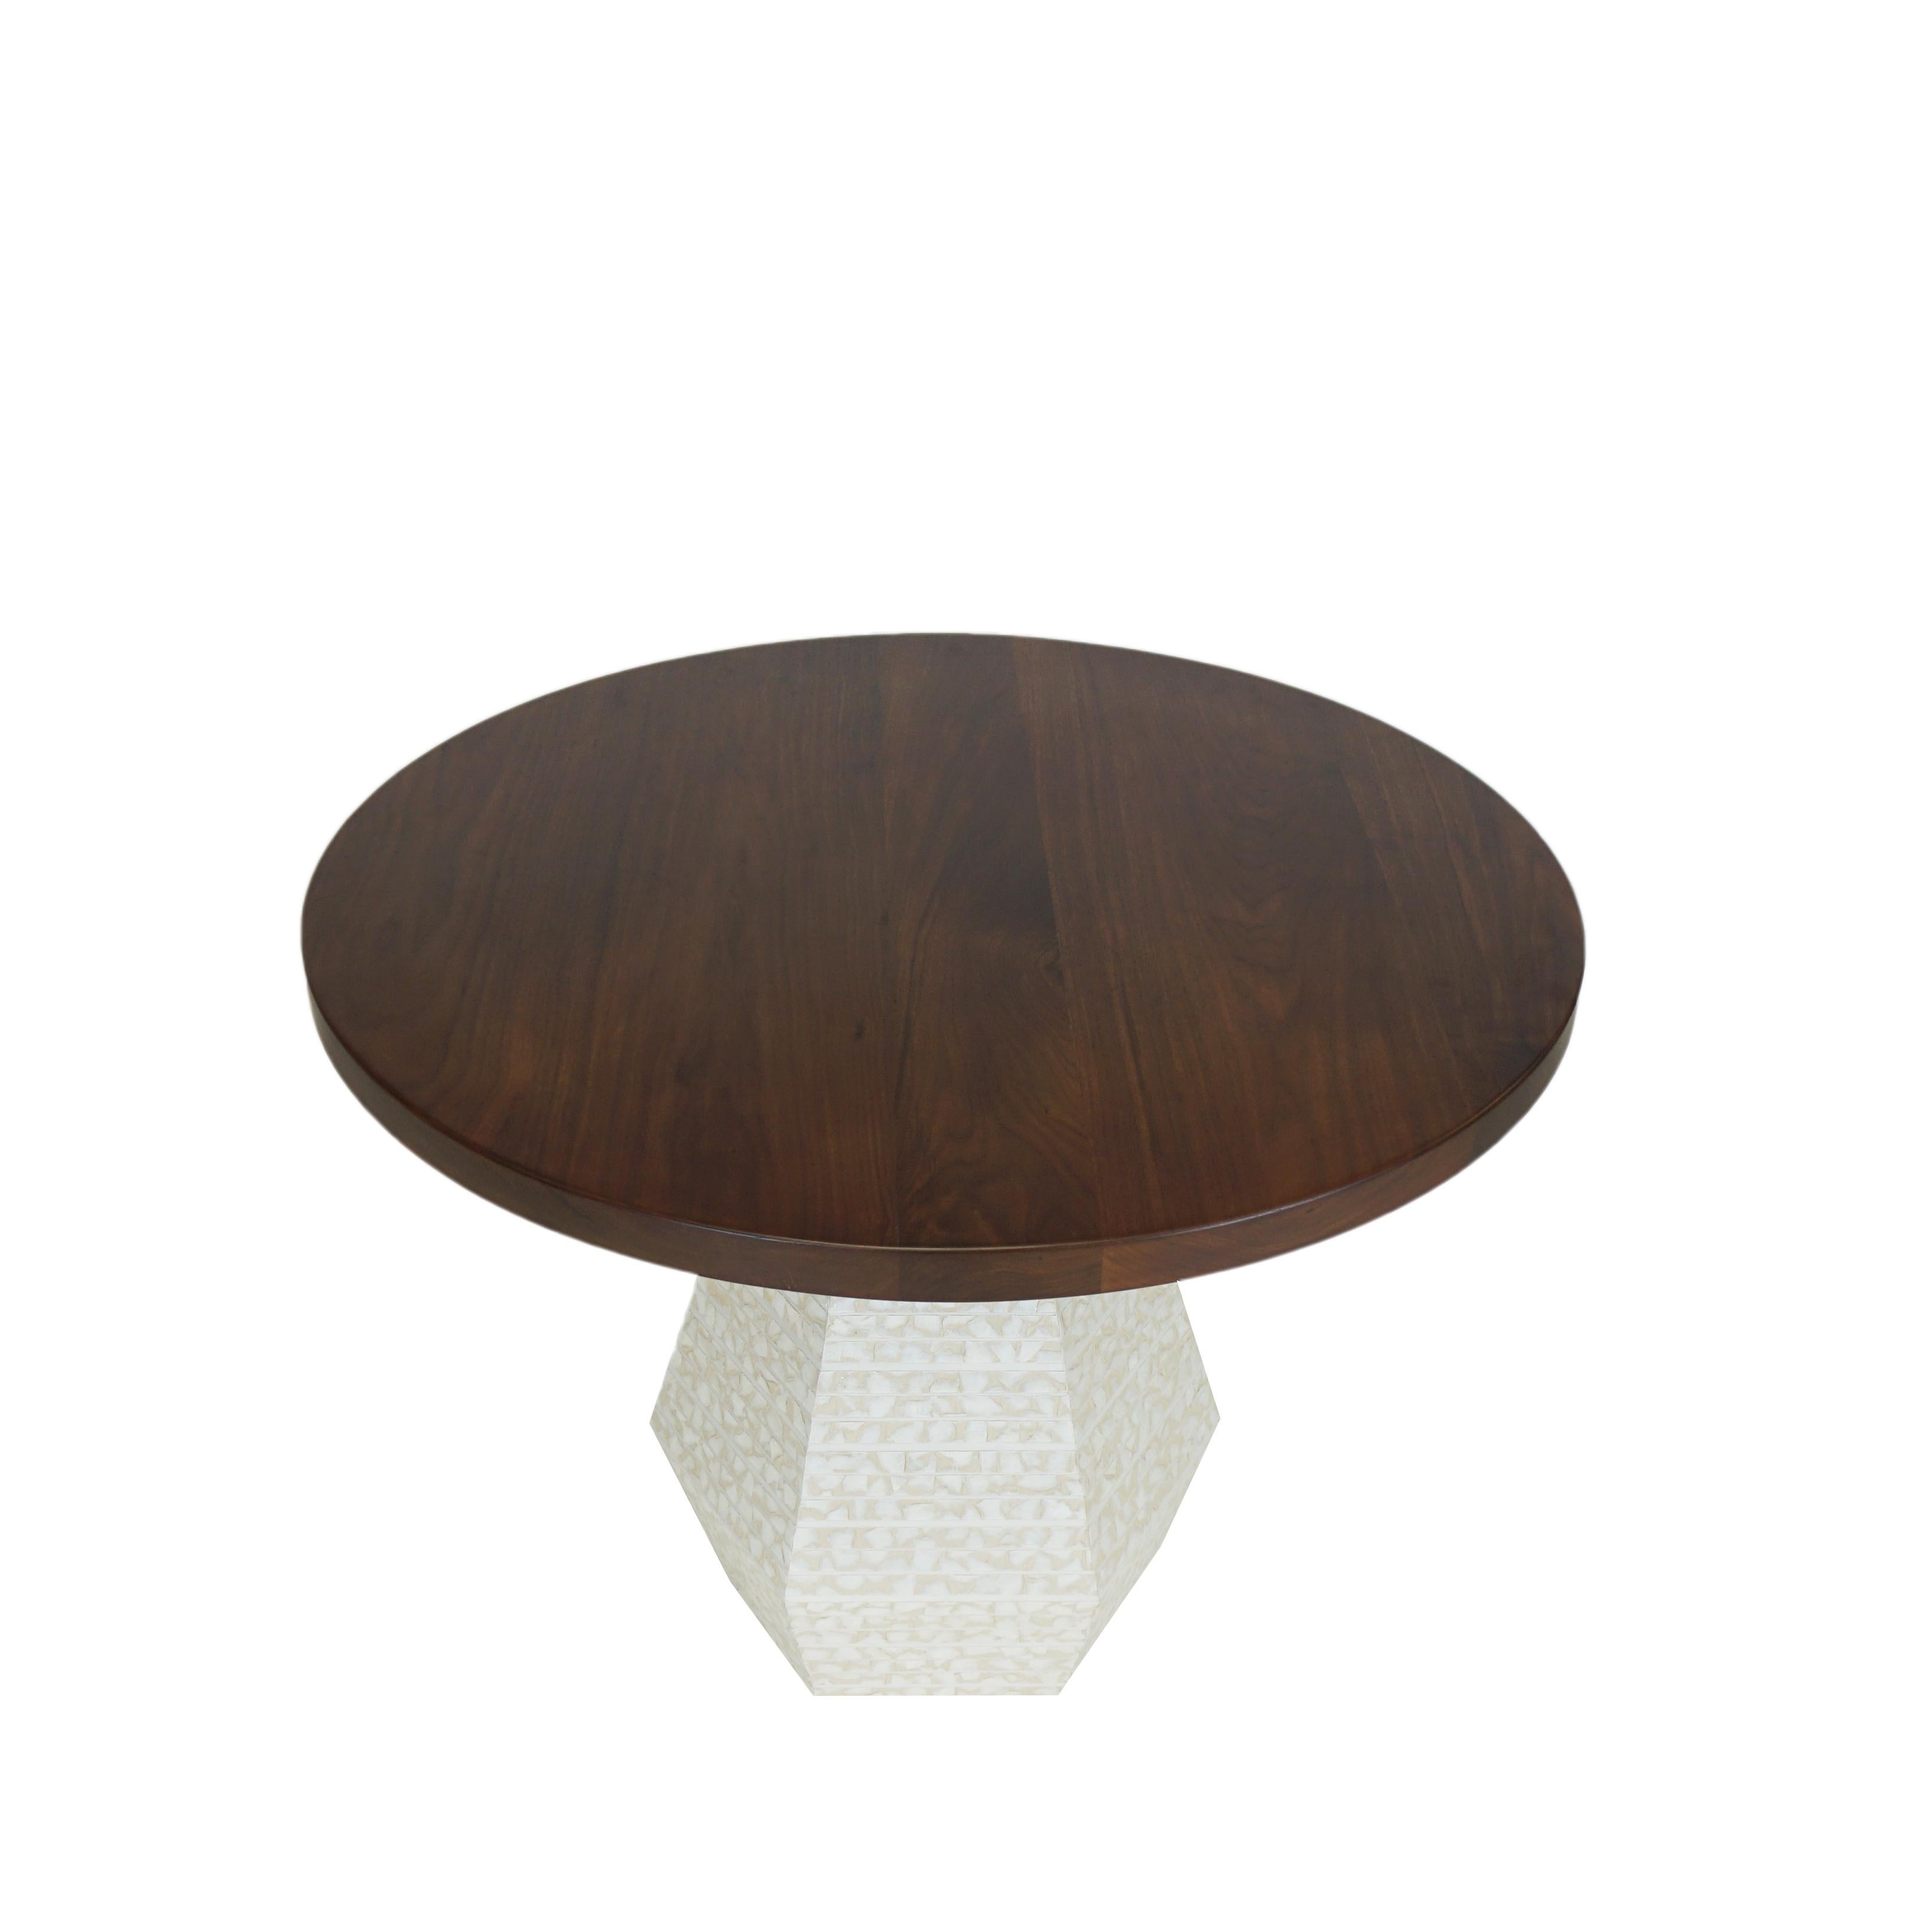 Our Capriz dining table is a modern round table with a walnut top finished in a satin lacquer. The hexagon shaped based is covered in Capiz shells, often referred to as “glass oysters” because of their translucent appearance. Custom sizes available.